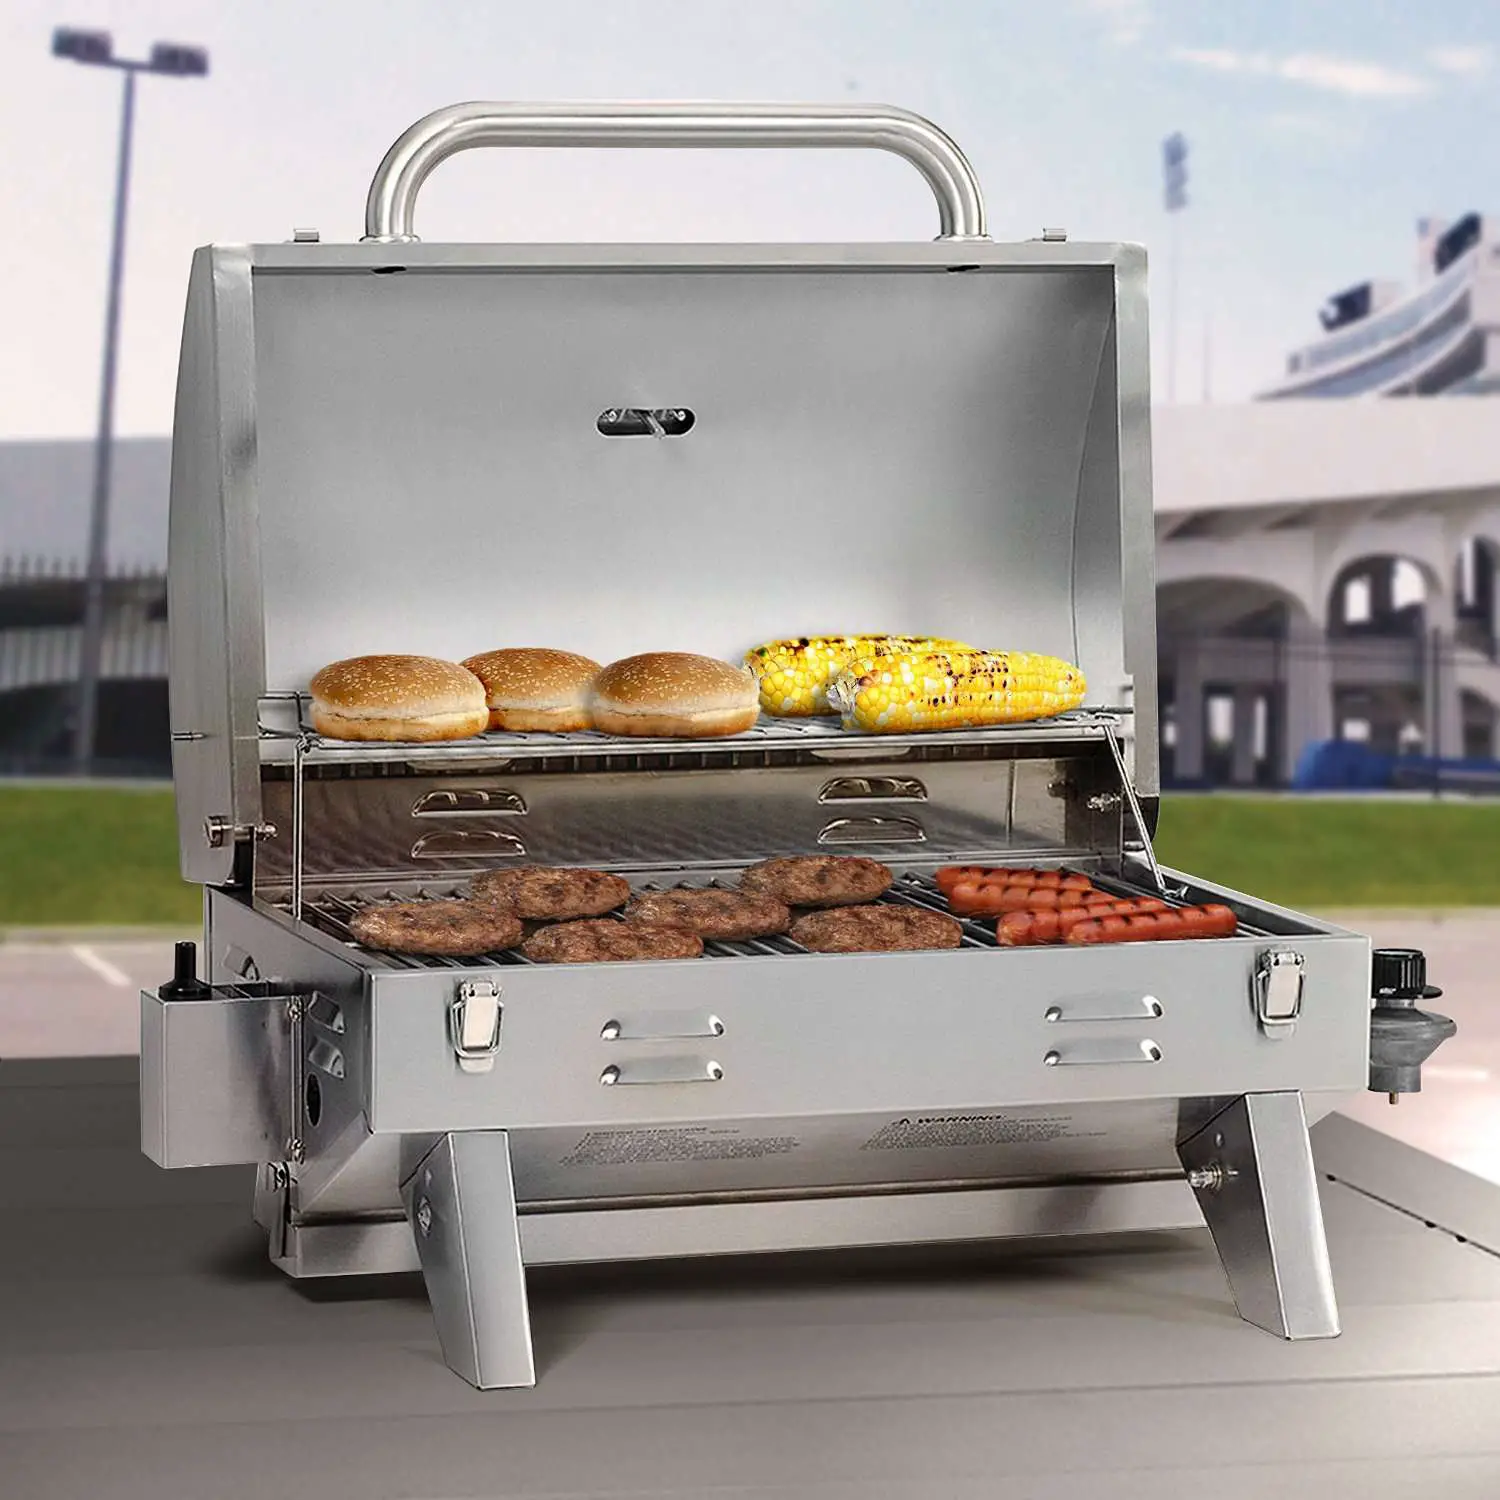 Aussie 205 Stainless Steel Tabletop Gas Grill Review